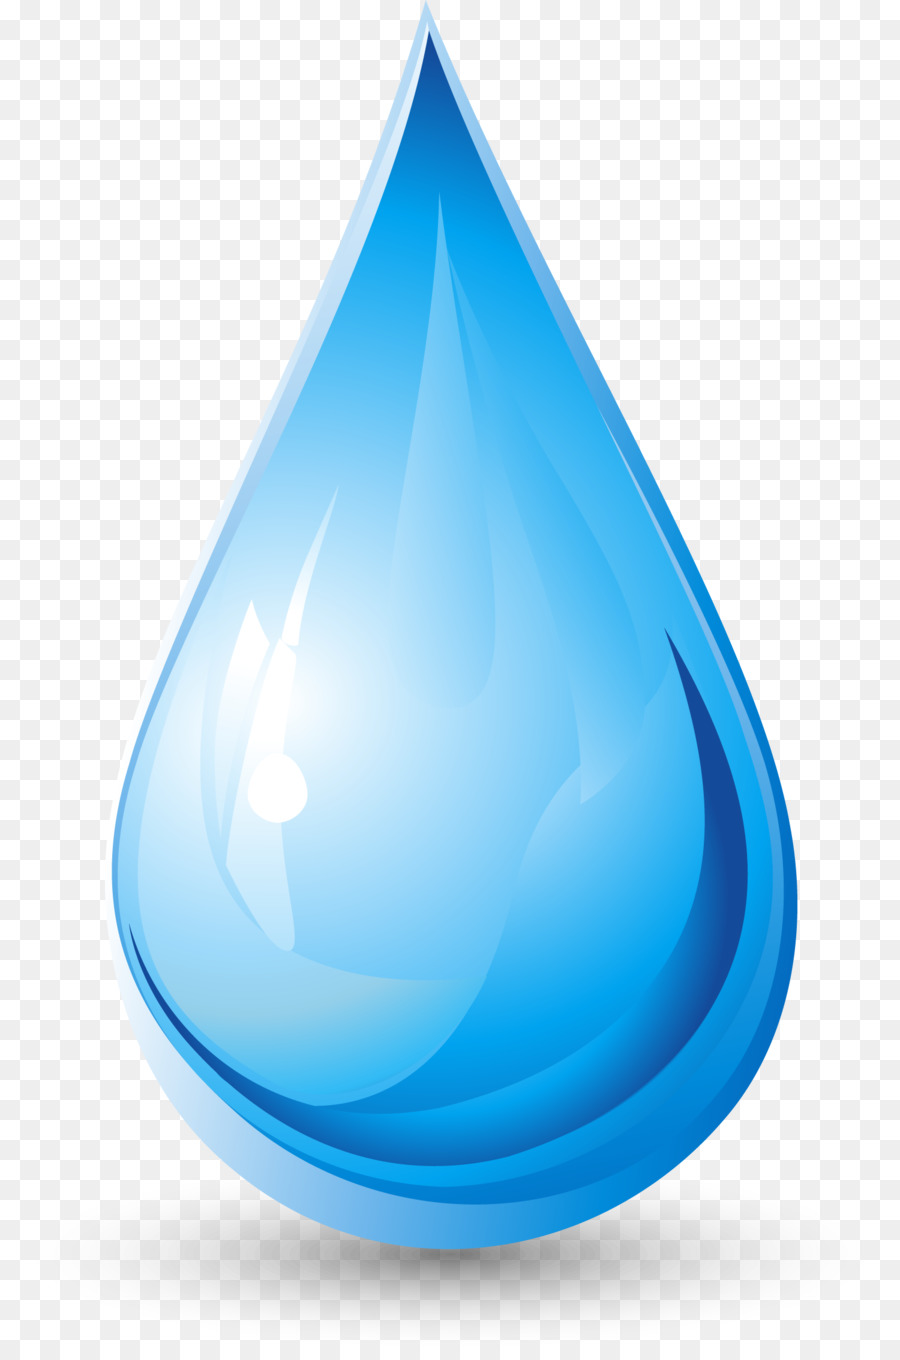 Water-Drop - Vector a drop of water png download - 1500*2256 - Free Transparent Water png Download.